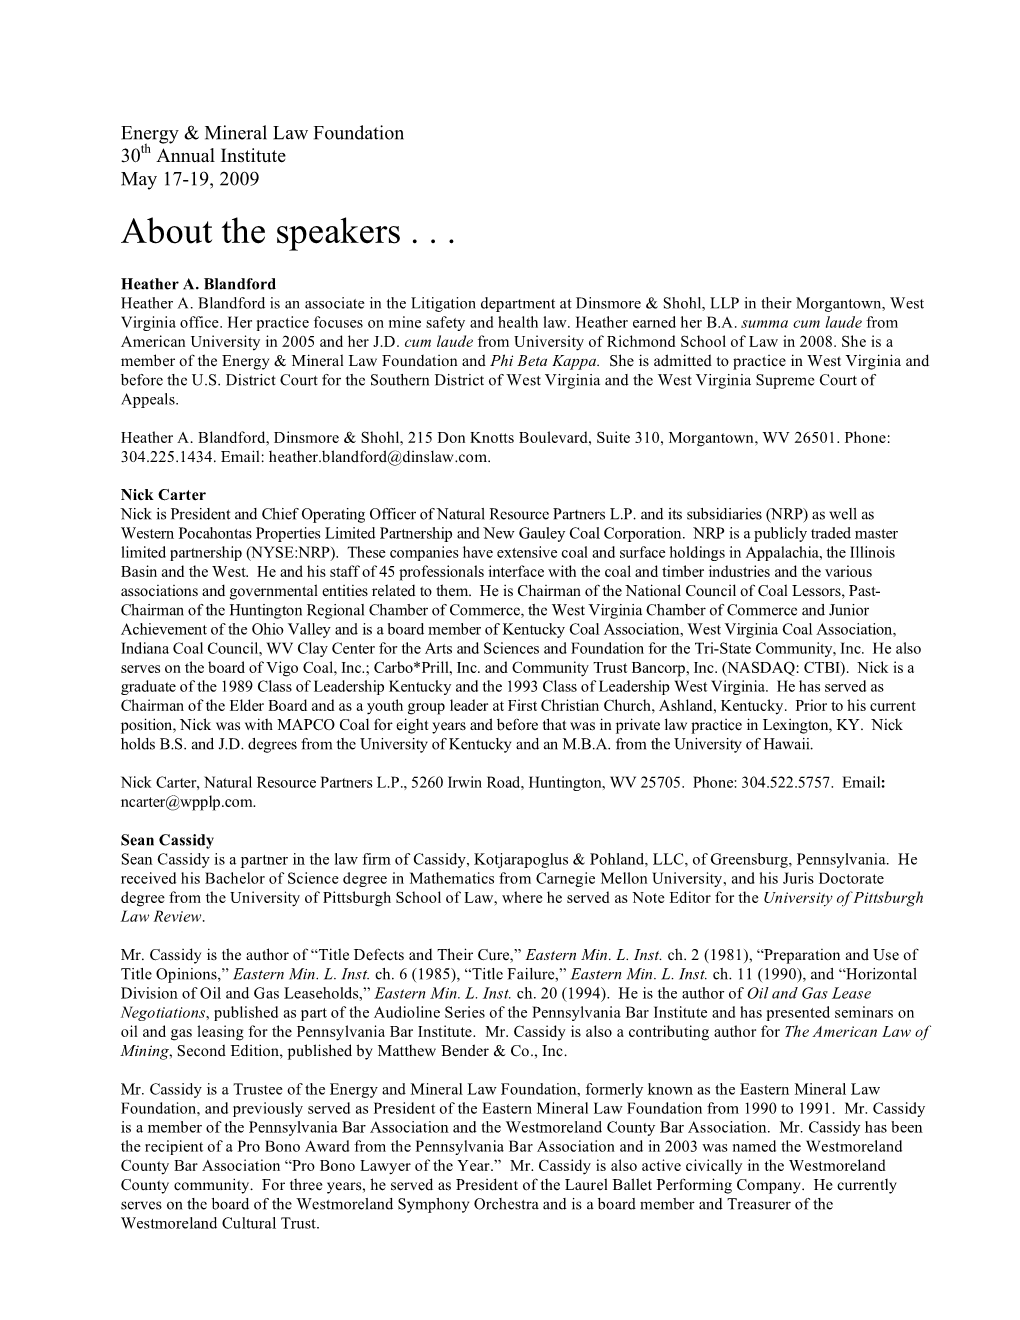 About the Speakers